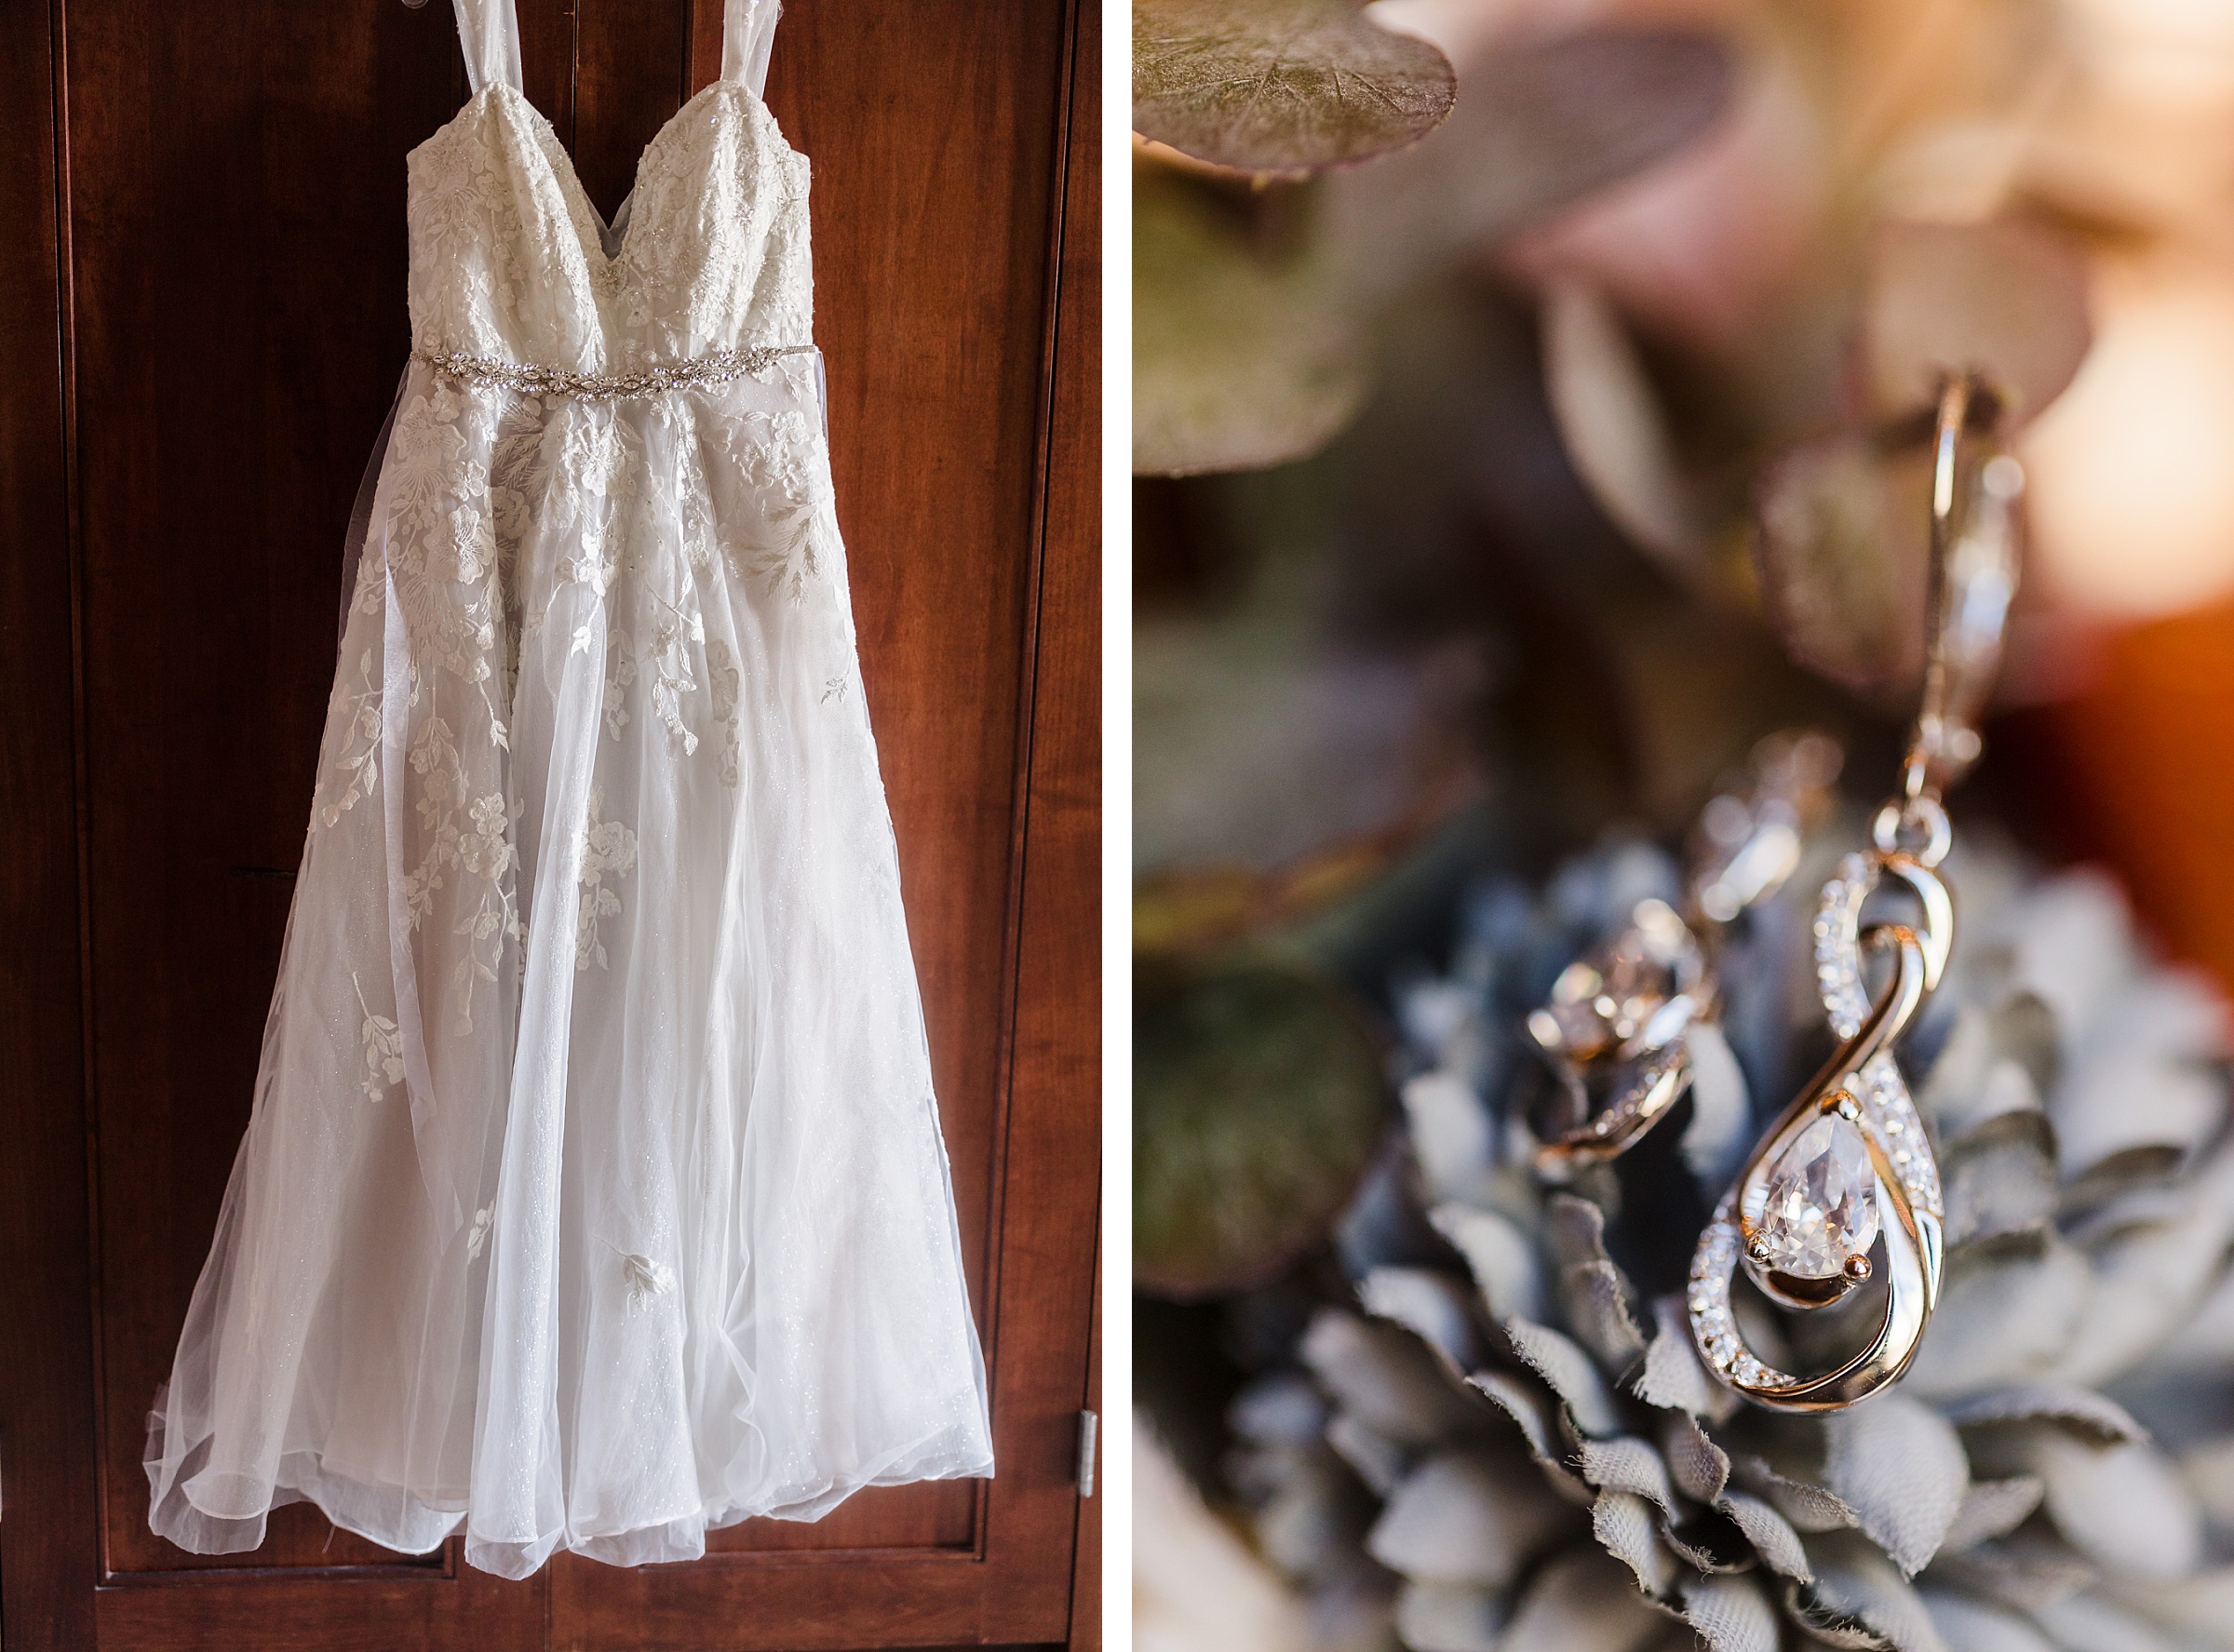 Bridal Gown and ear rings on display before a wedding at the Destihl Brewery in Normal, Illinois.